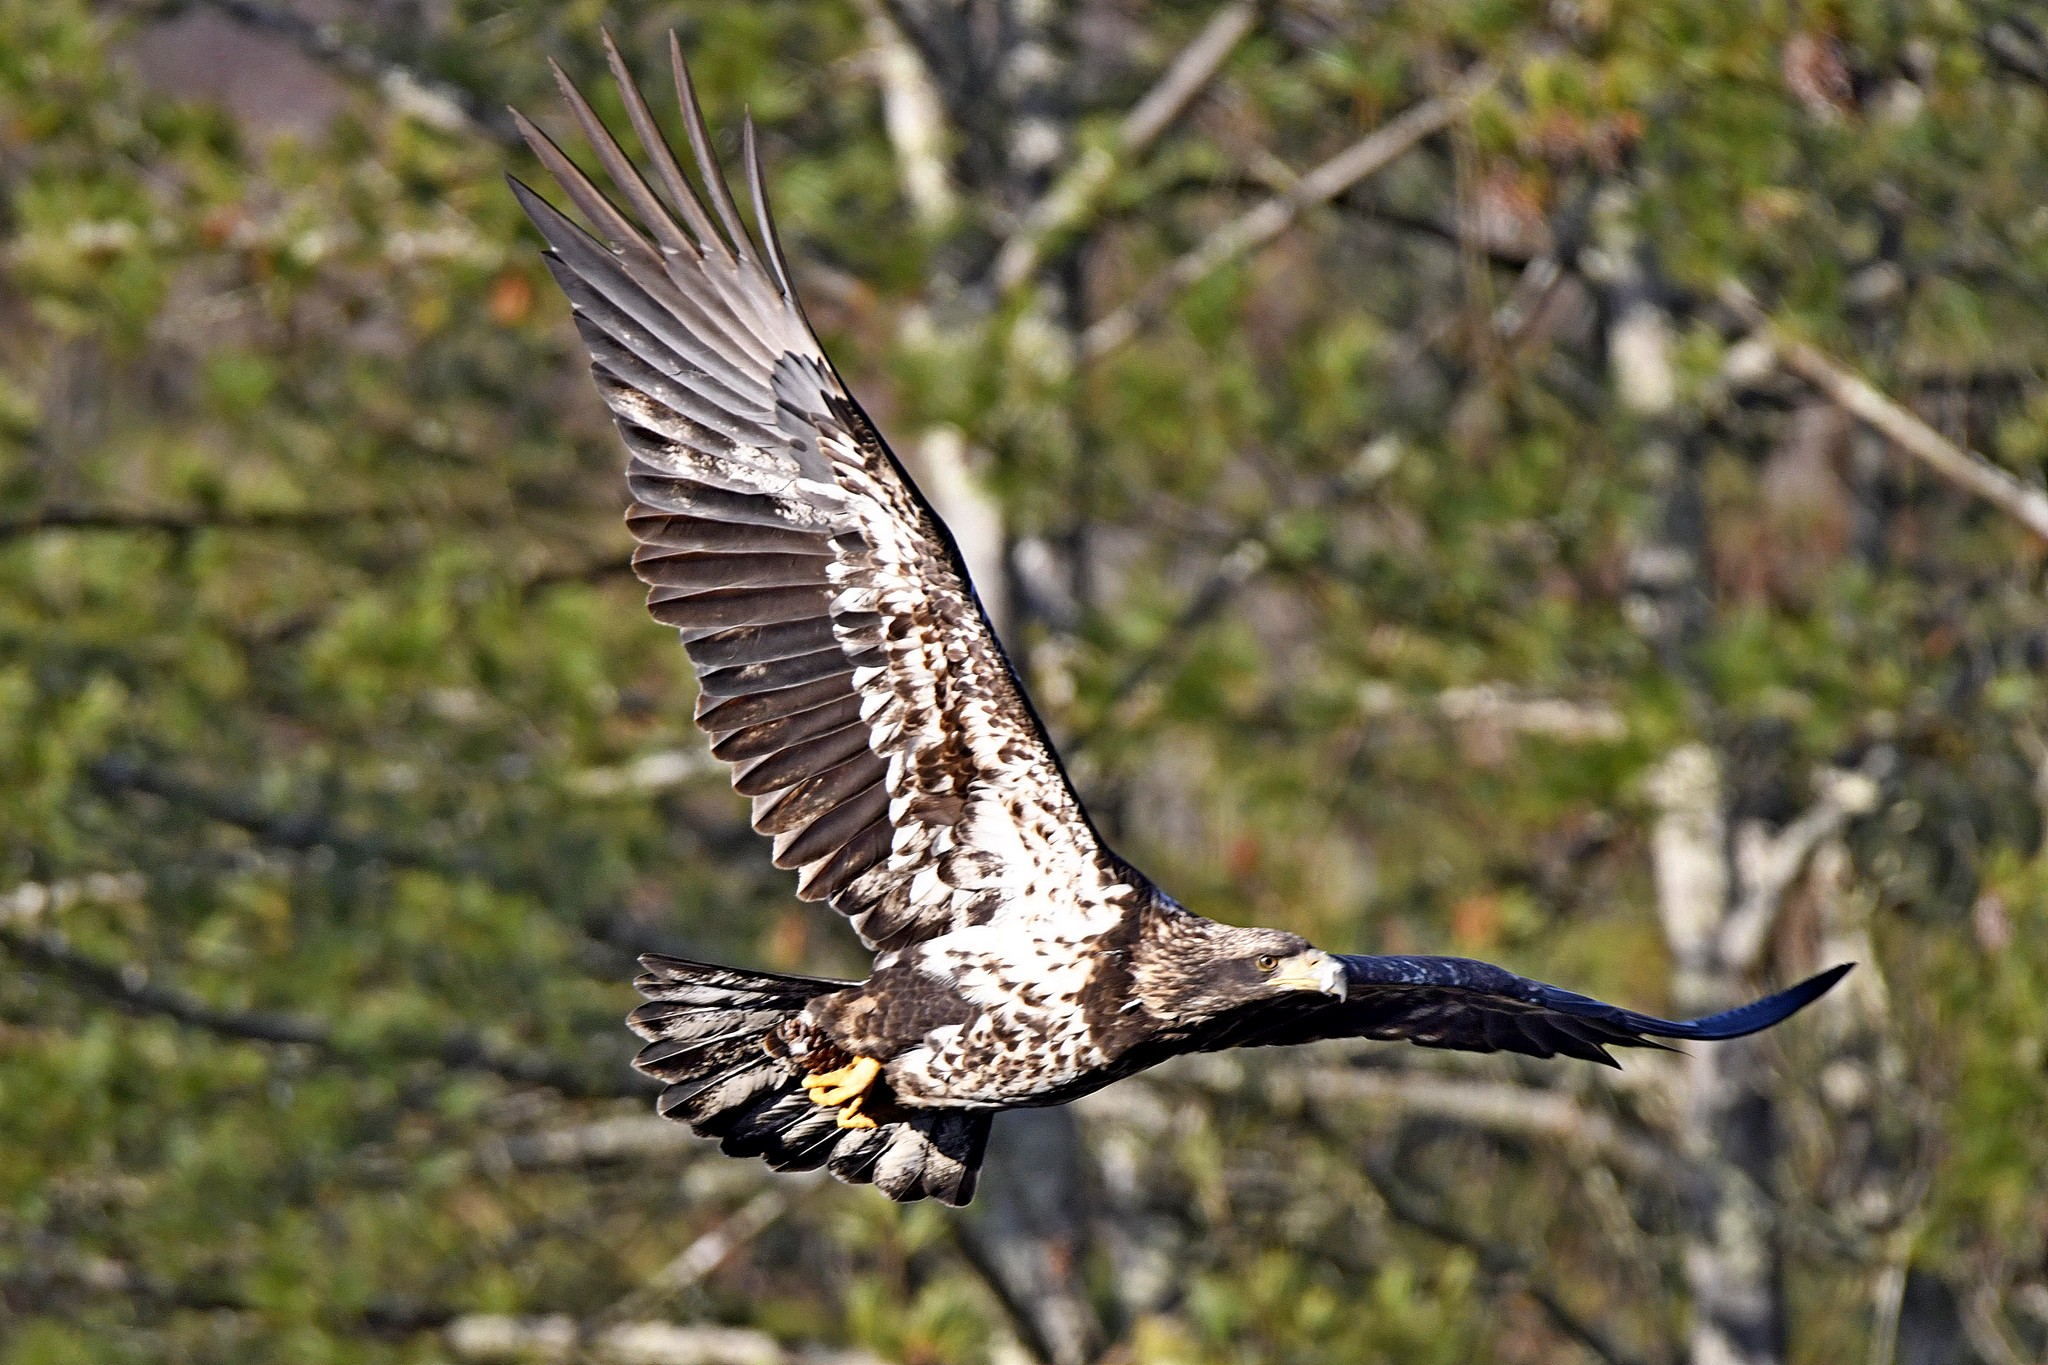 Eagle_9373 Juvenile Bald Eagle in Flight On Mongaup River, NY by Buckmaster